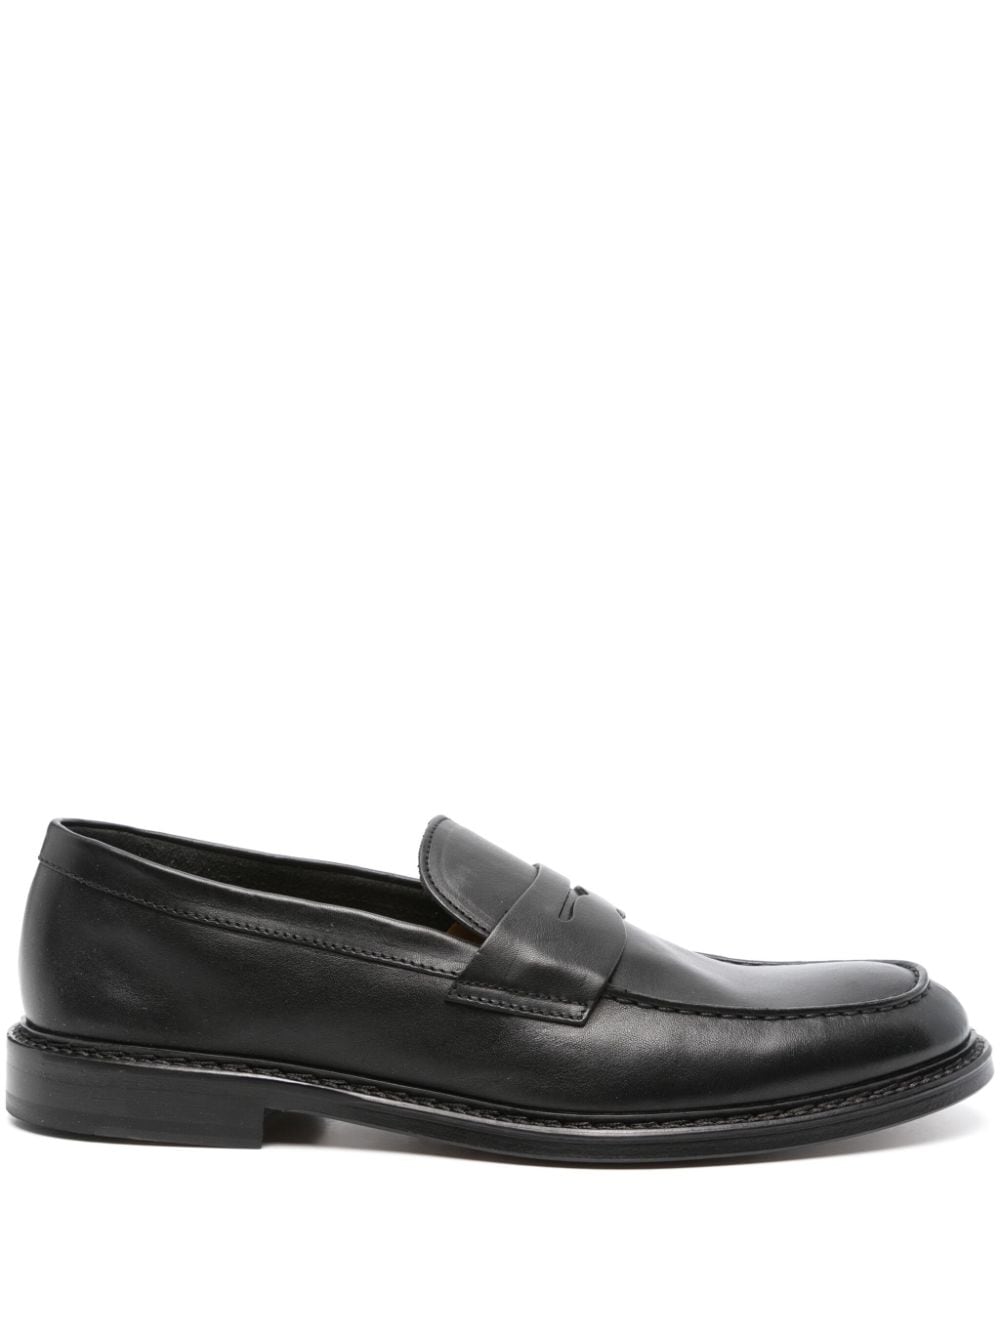 Doucal's penny slot leather loafers - Black von Doucal's